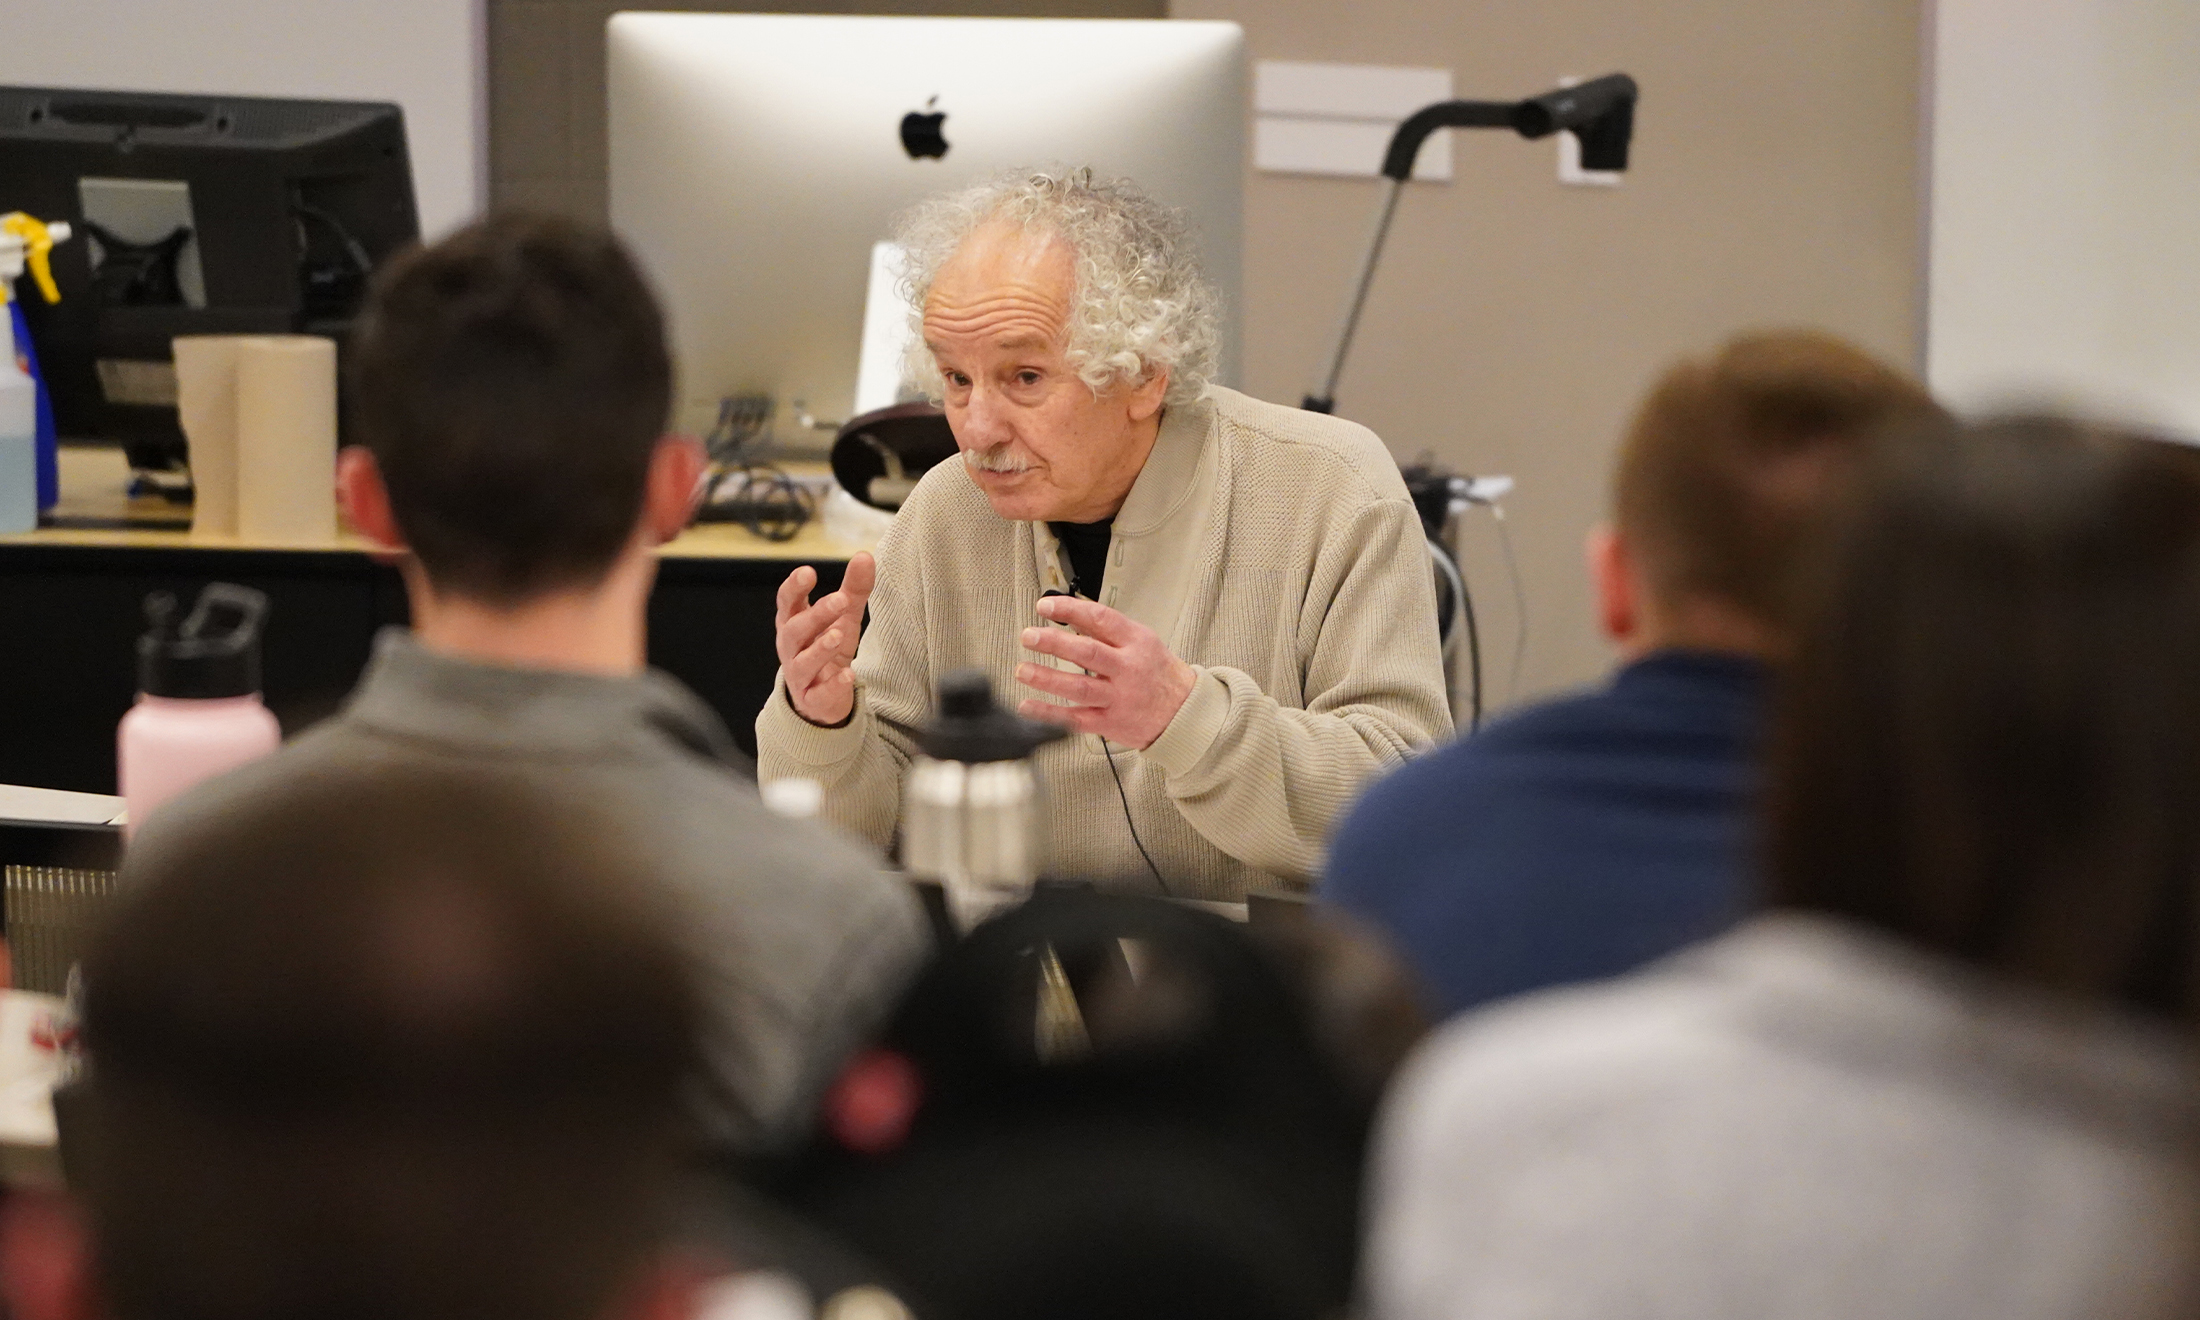 An image of a Holocaust survivor talking to students